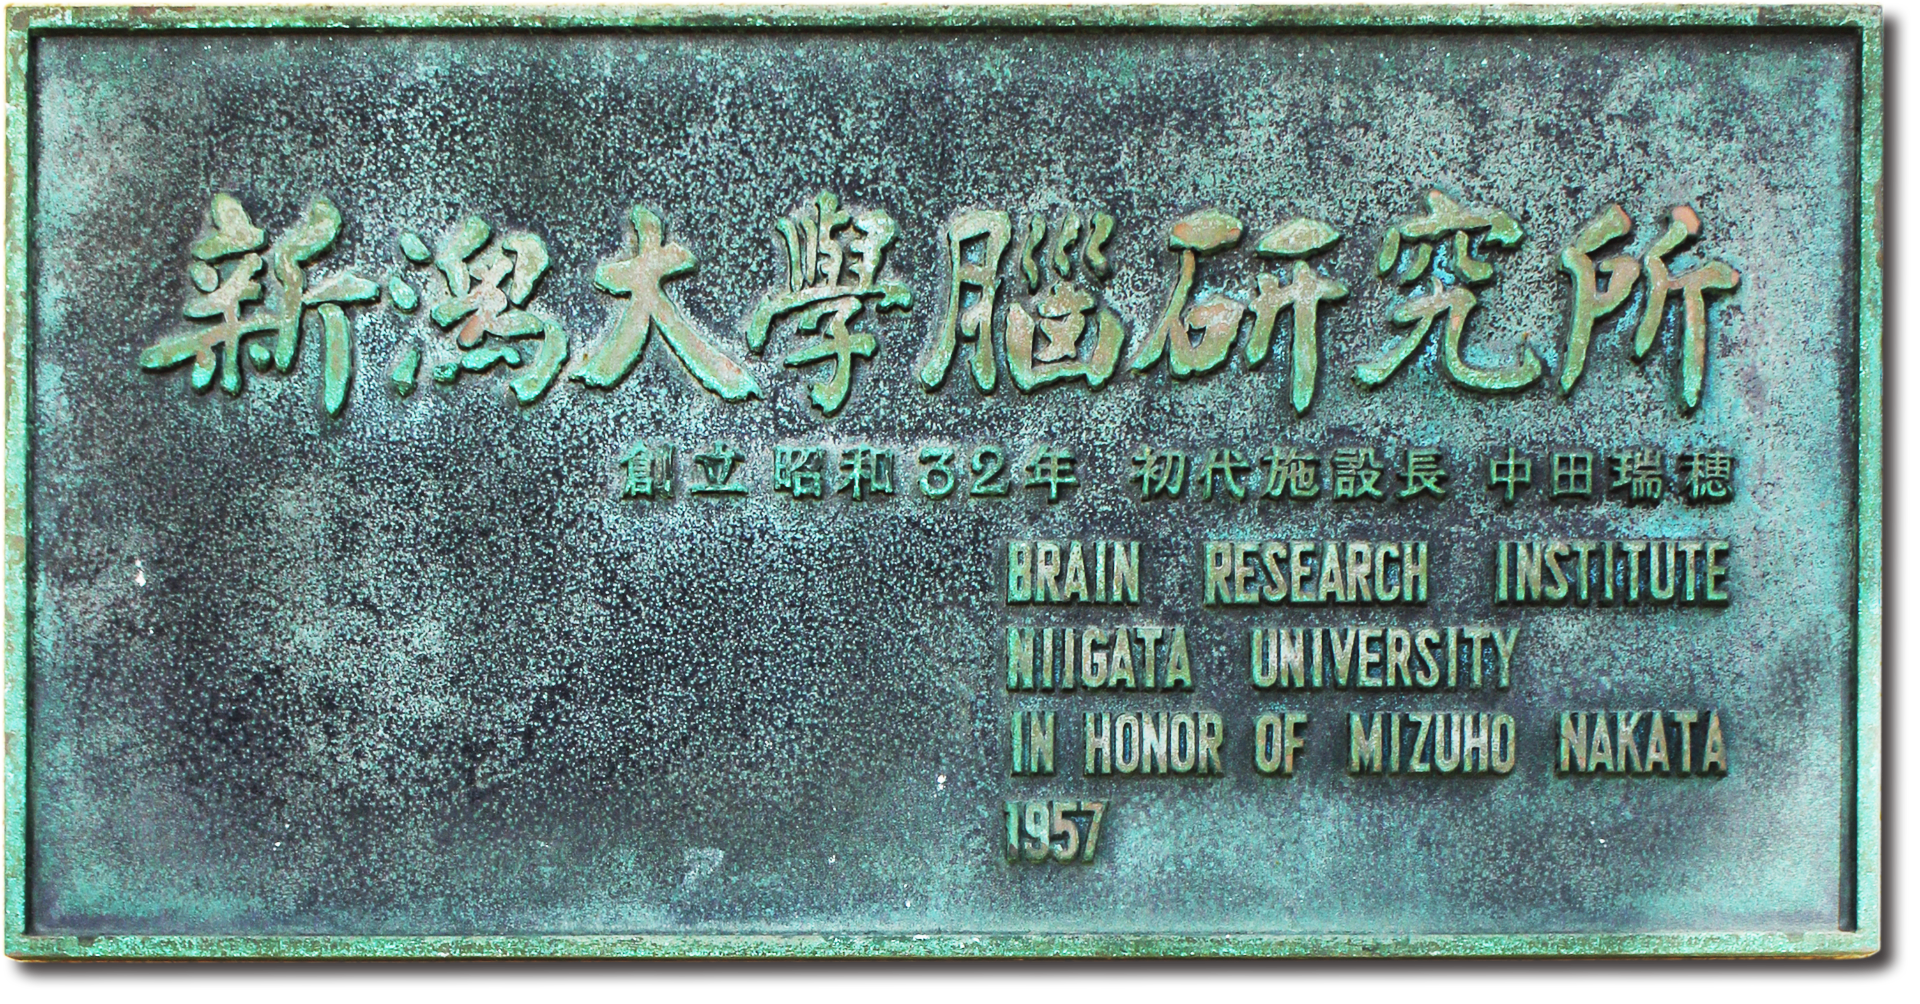 A signboard of a brain research institute engraved with the name of Professor Mizuho Nakata